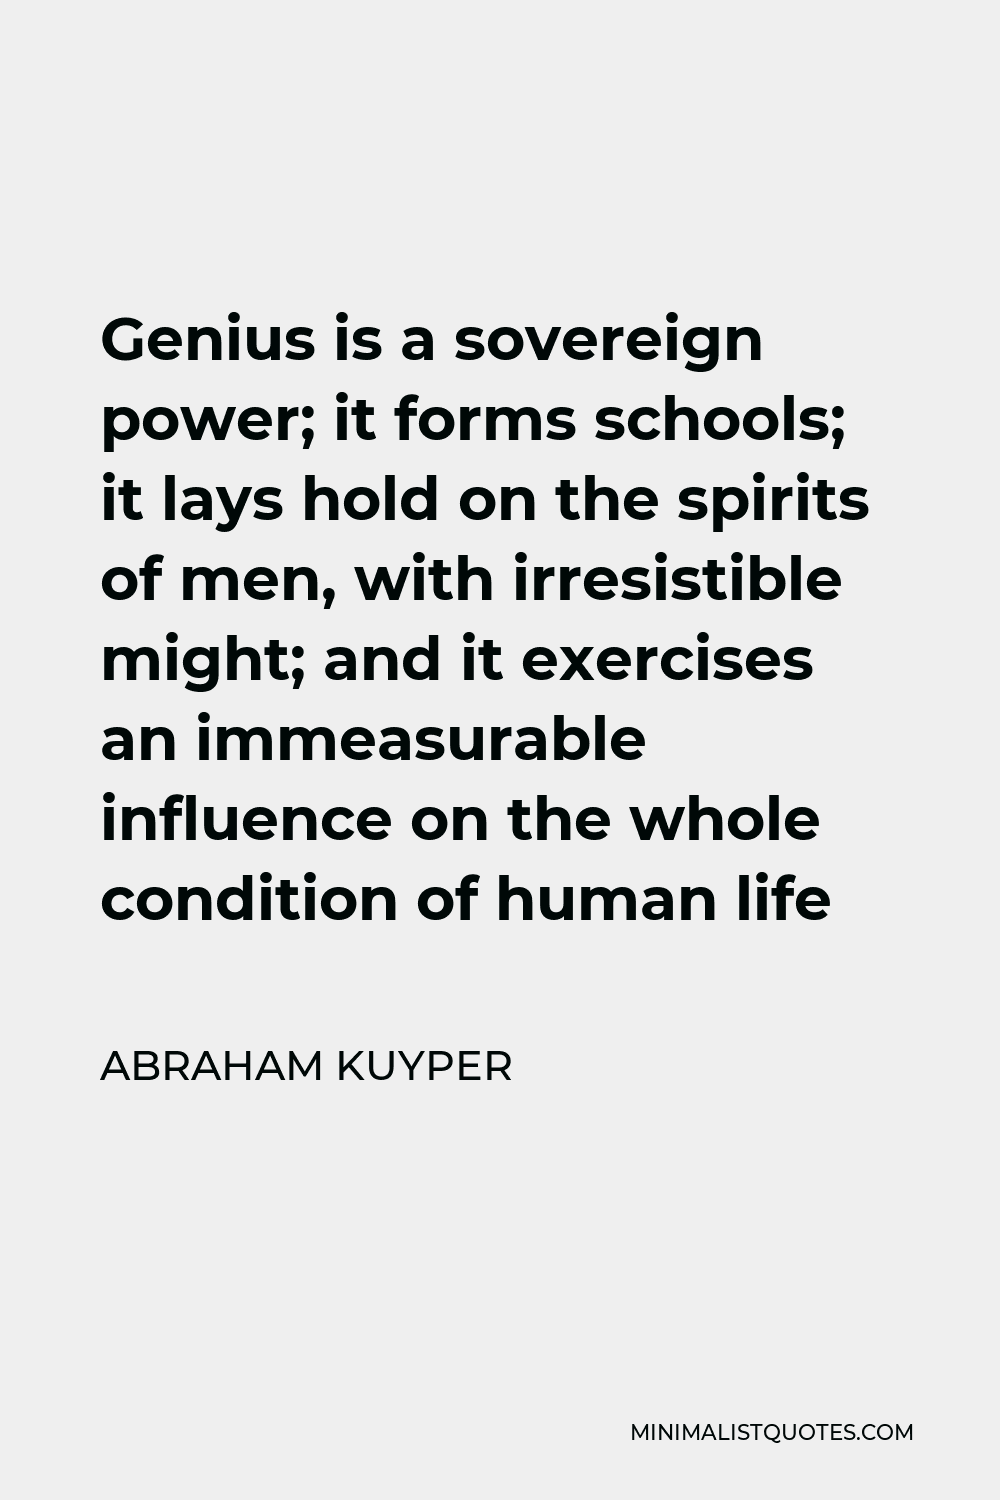 Abraham Kuyper Quote - Genius is a sovereign power; it forms schools; it lays hold on the spirits of men, with irresistible might; and it exercises an immeasurable influence on the whole condition of human life